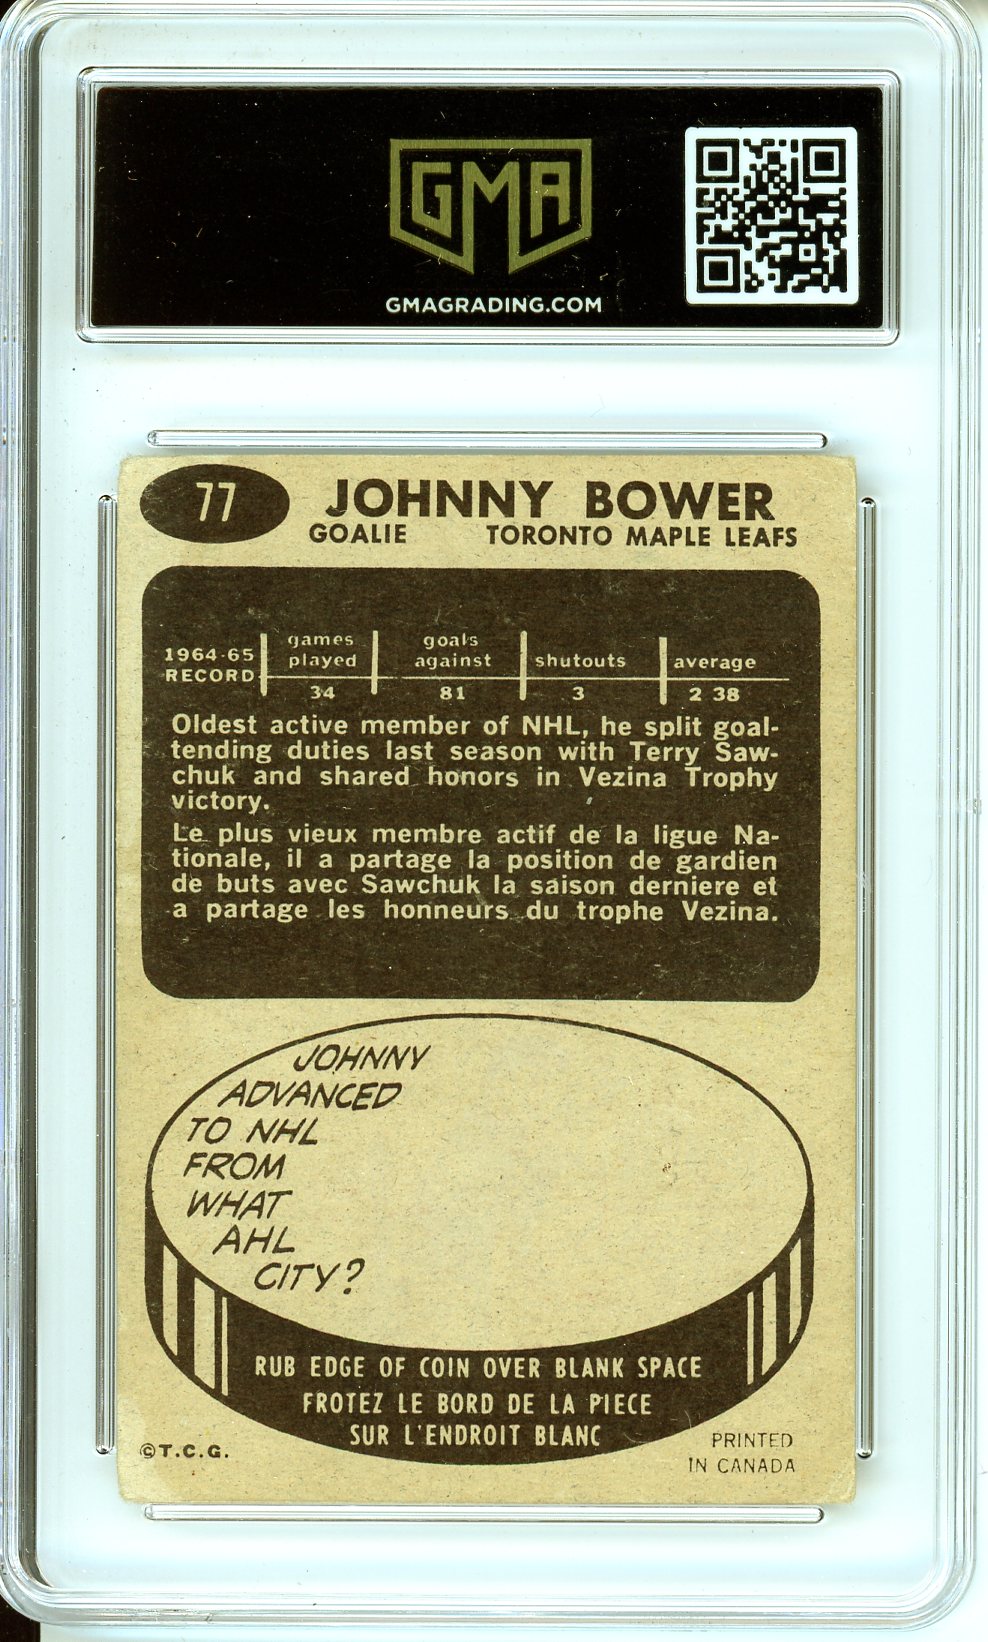 1965 Johnny Bower #77 Double Print Card GMA 4